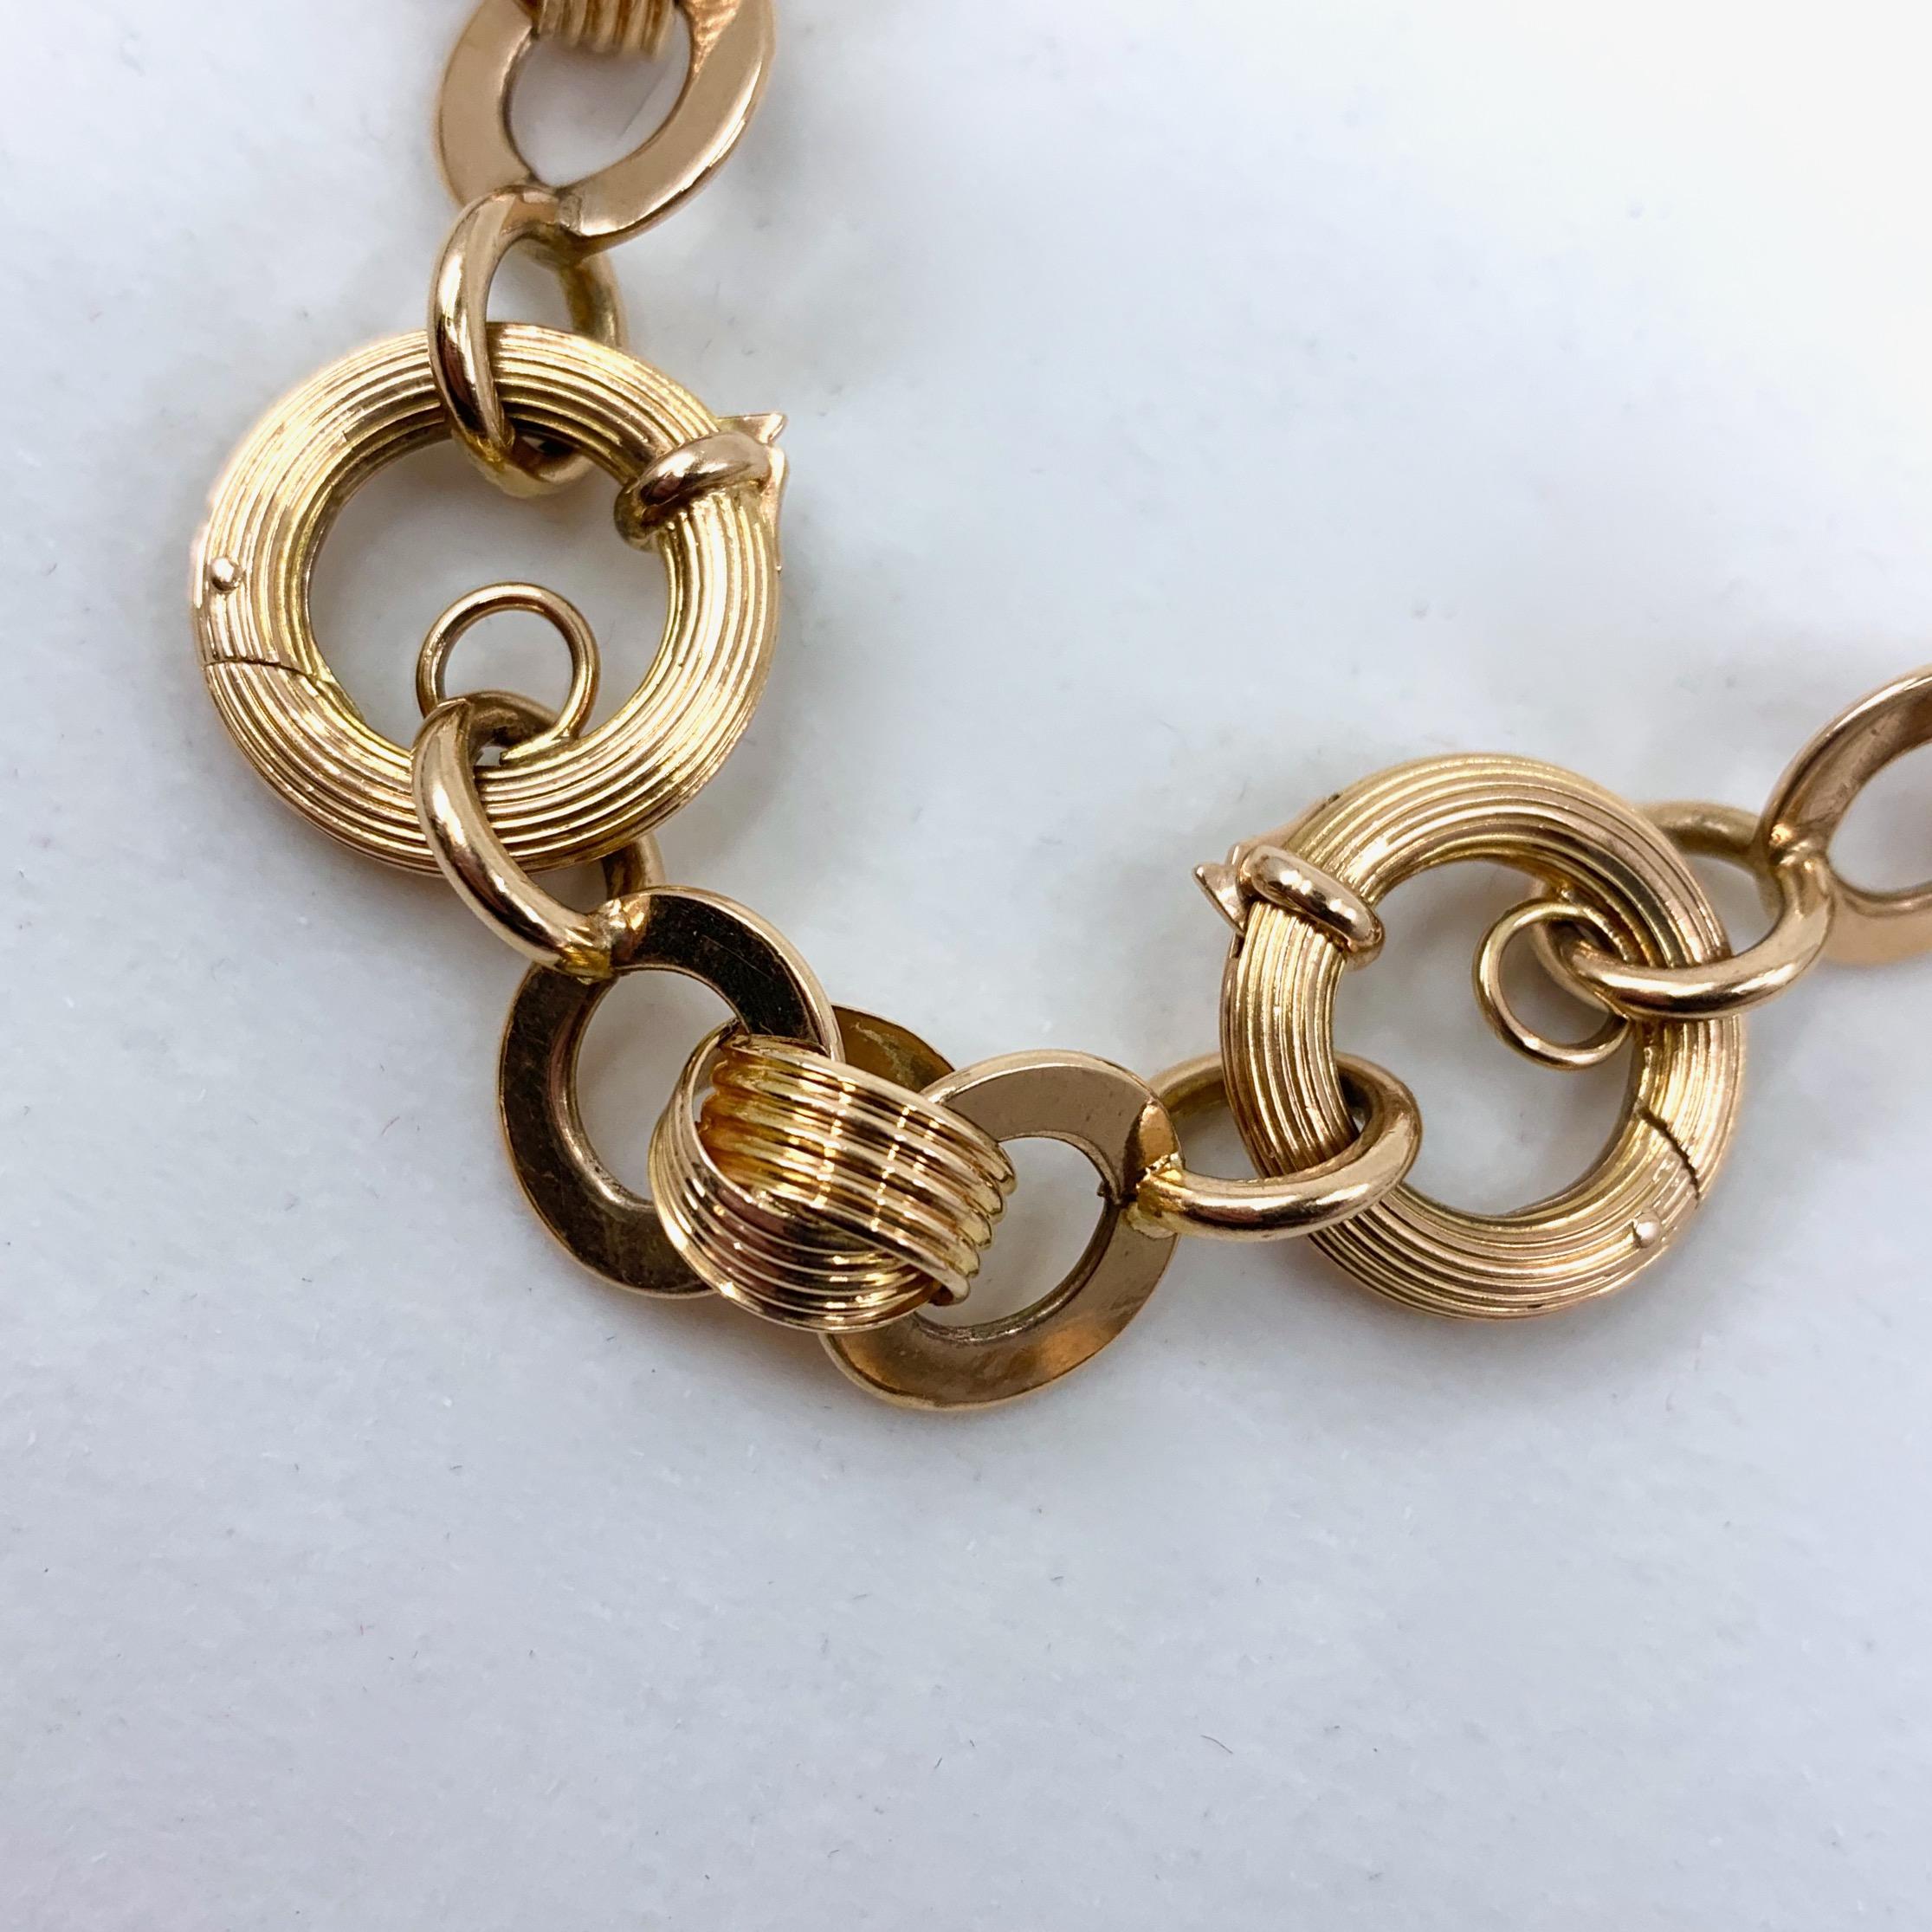 Ring & Connector Chain in 18 Karat Gold with Detachable Extender Fob, circa 1920 1